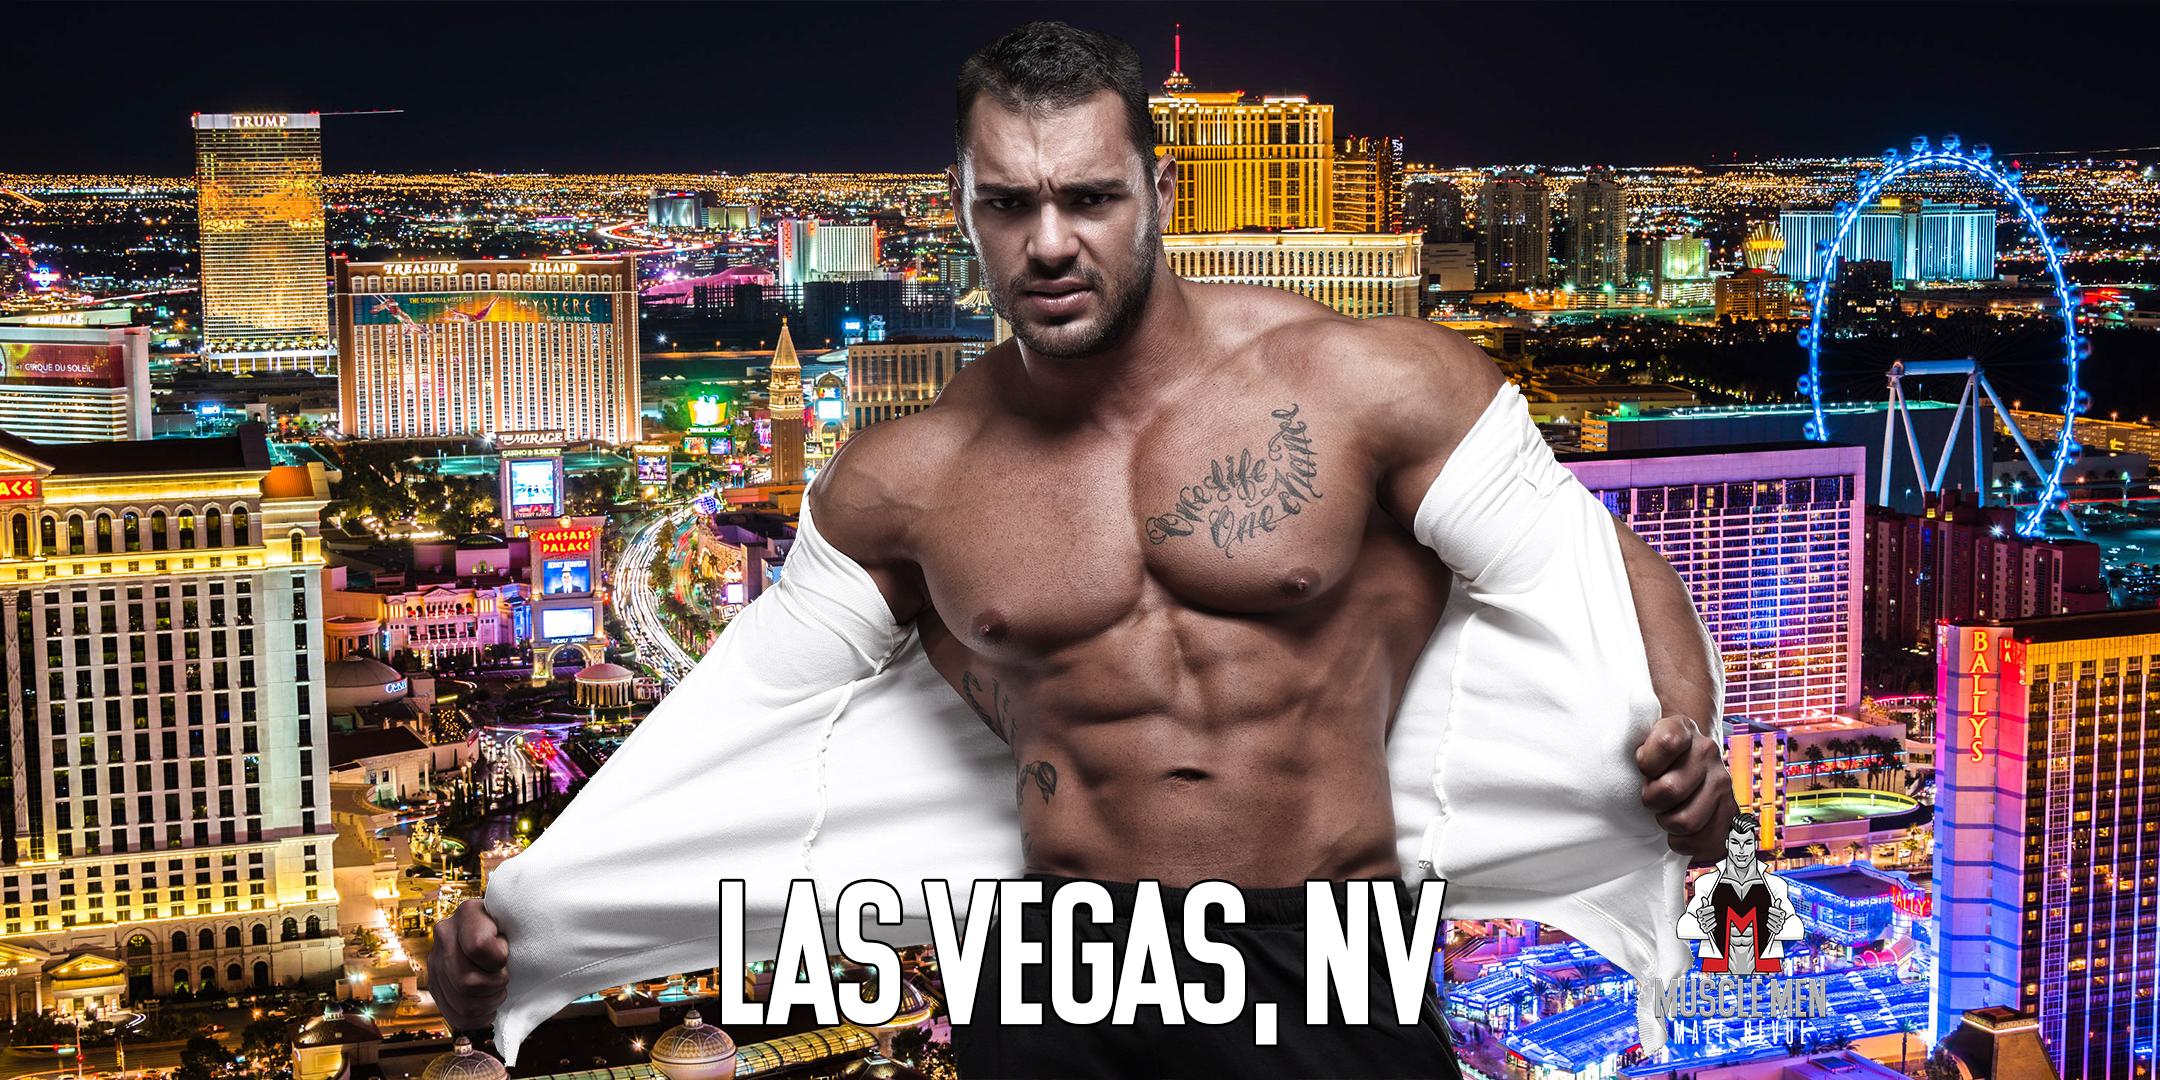 Muscle Men Male Strippers Revue And Male Strip Club Shows Las Vegas Nv 29 May 2020